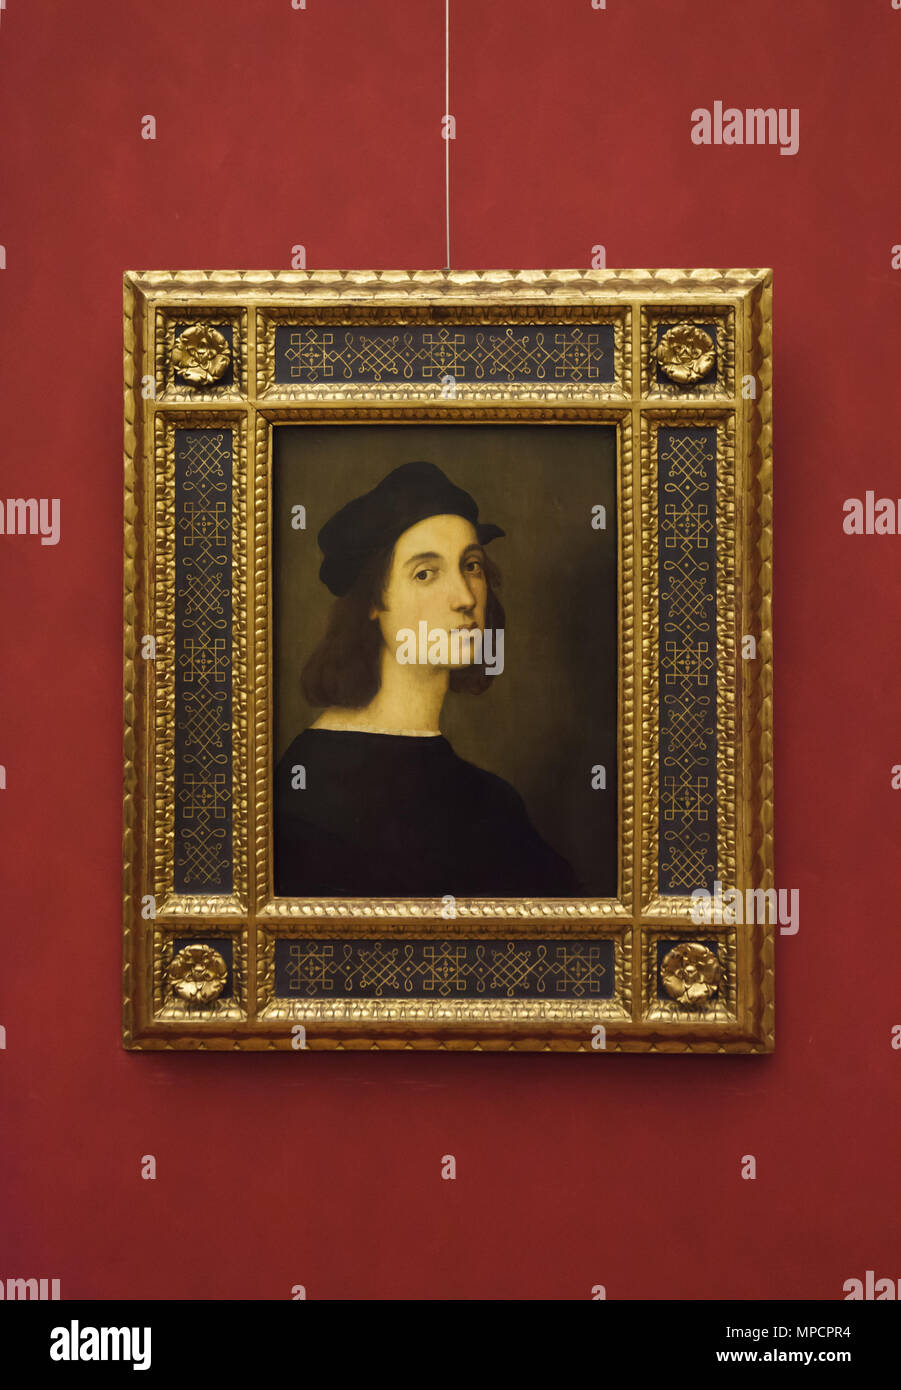 Self-portrait of Italian Renaissance painter Raphael dated from circa 1506 on display in the Uffizi Gallery (Galleria degli Uffizi) in Florence, Tuscany, Italy. Stock Photo